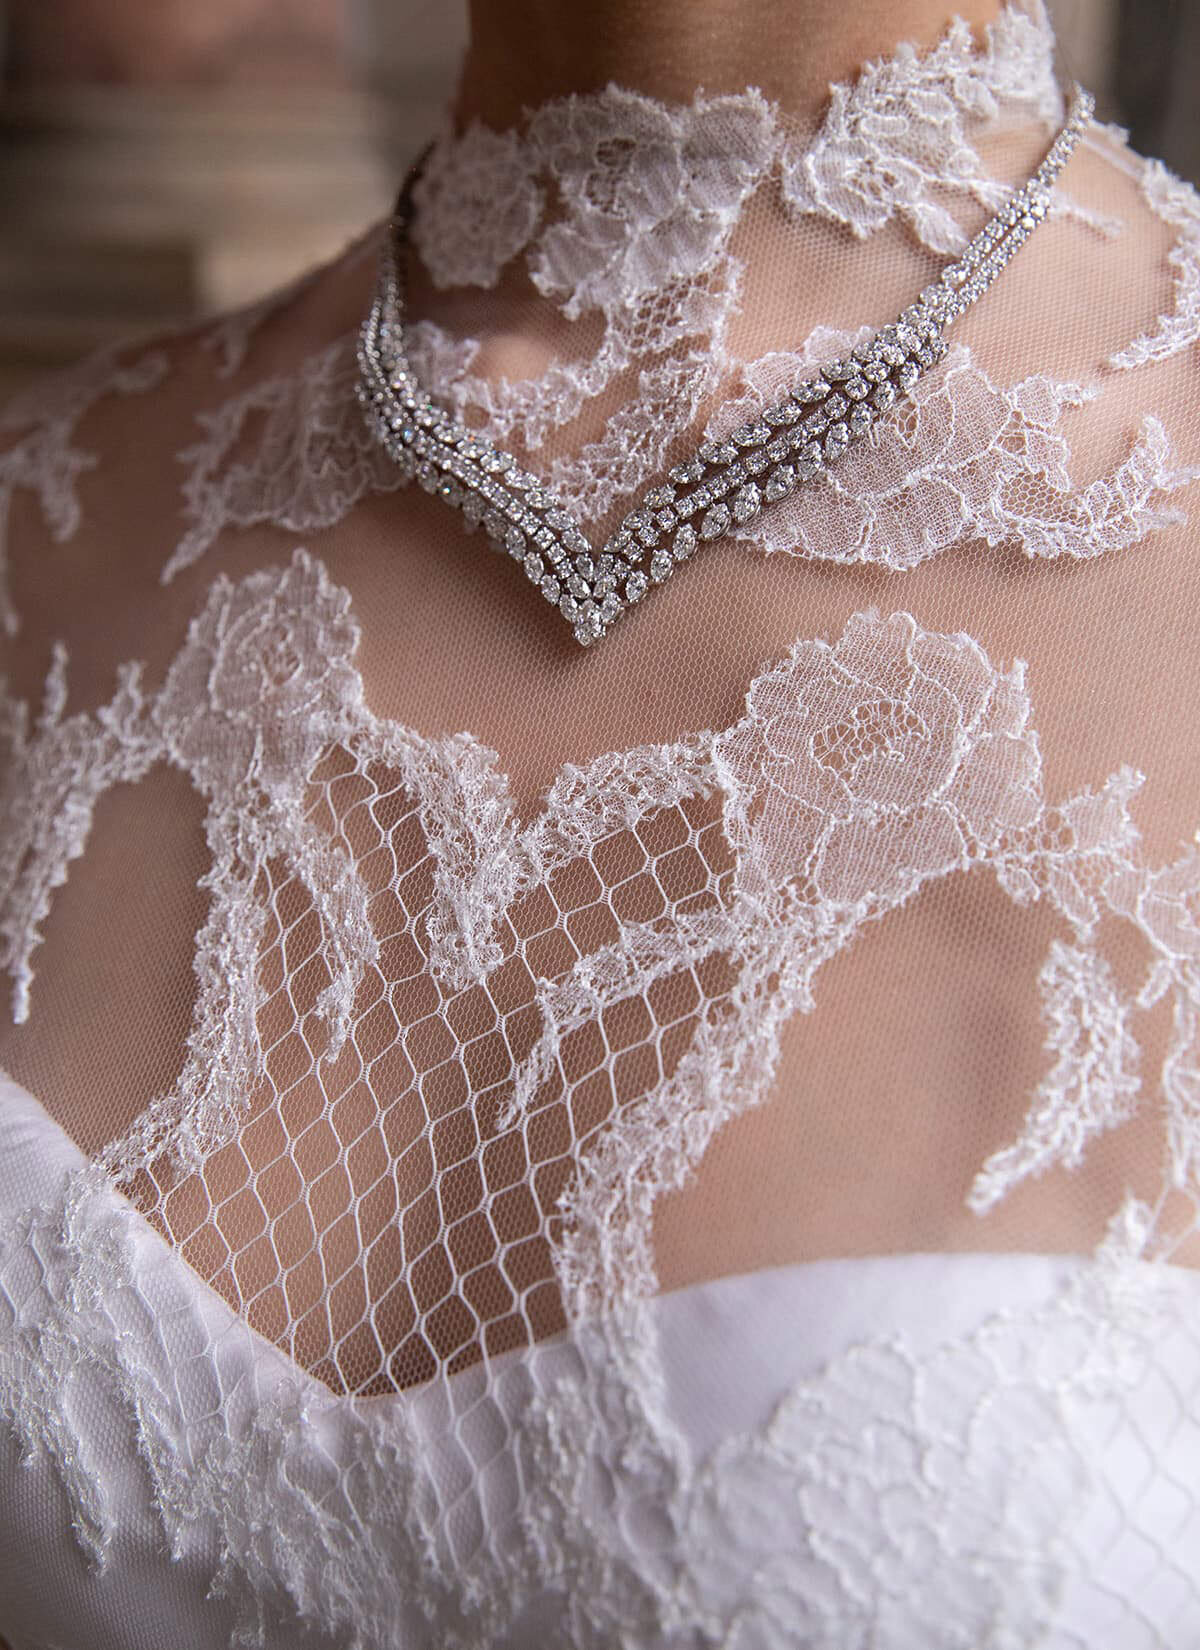 Closeup of lace on wedding gown